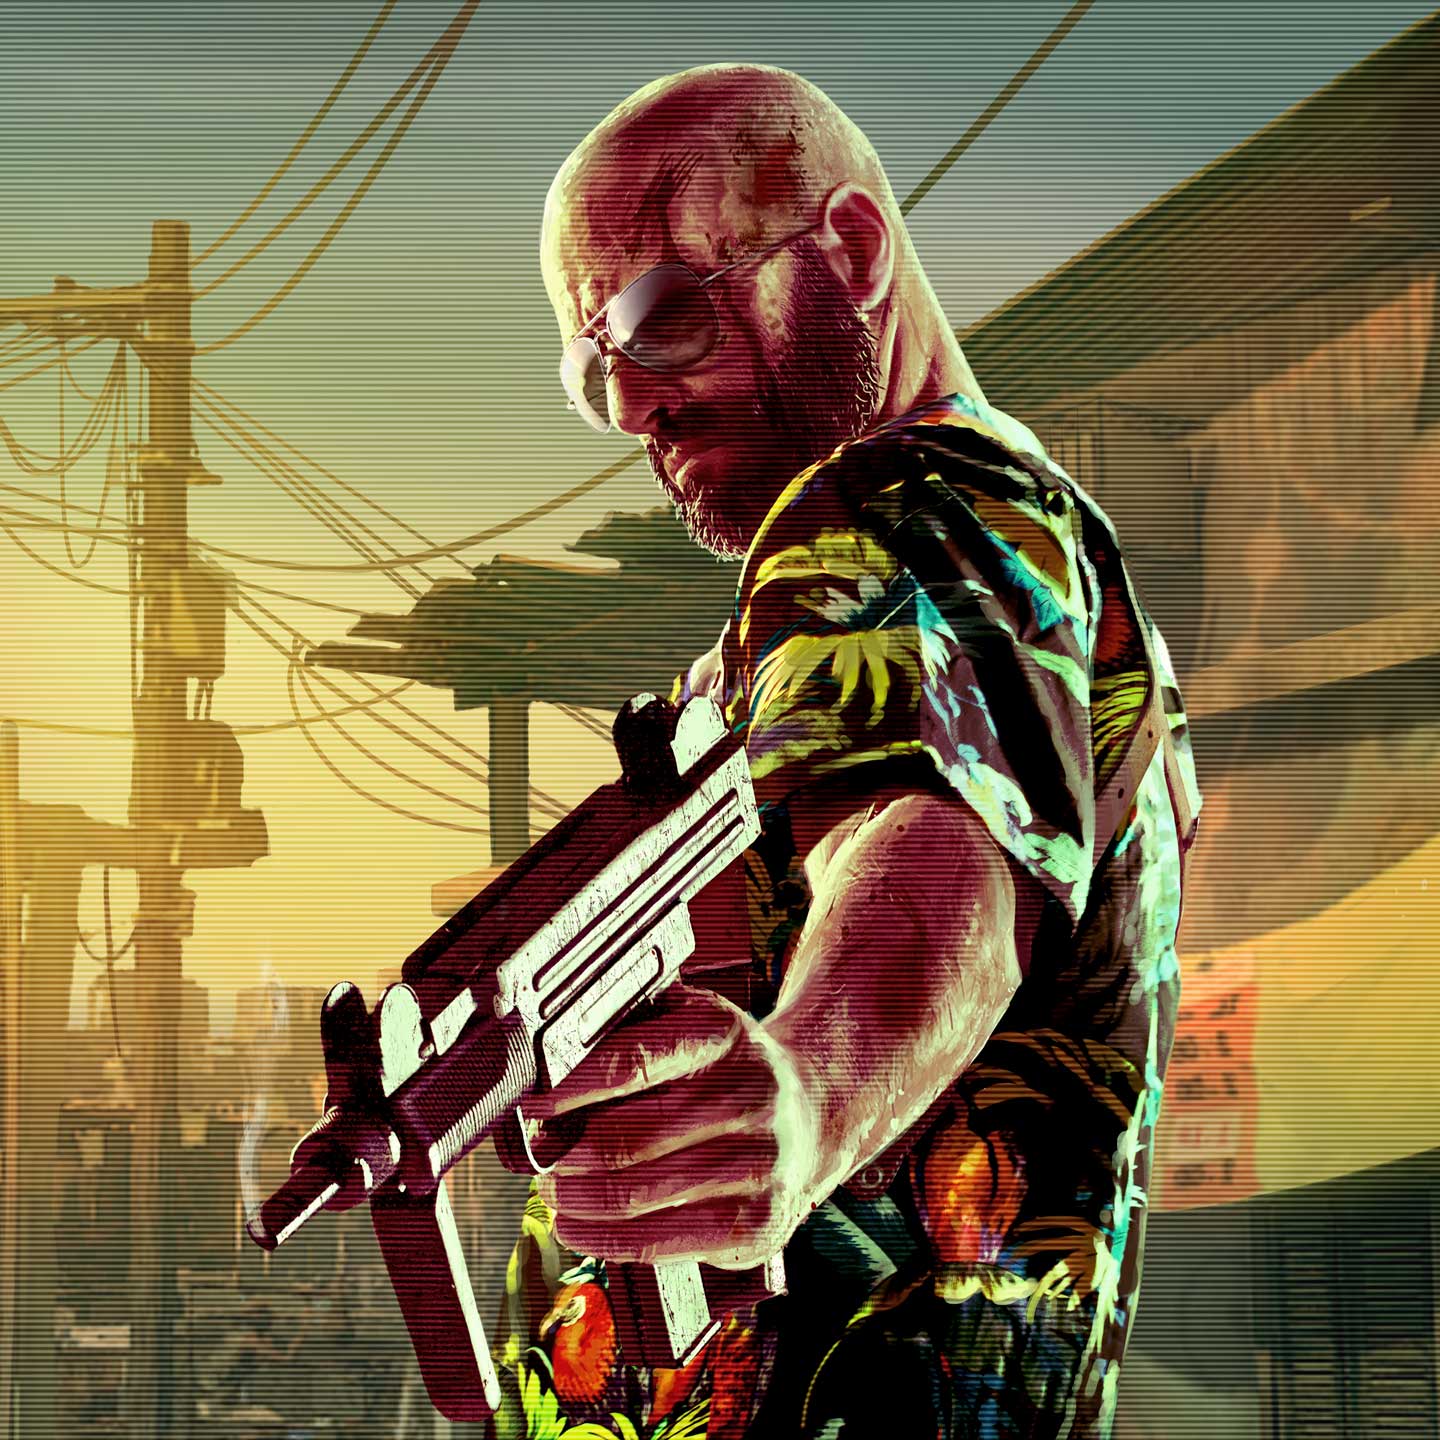 Max Payne 4' update: Why game won't likely come out anytime soon?